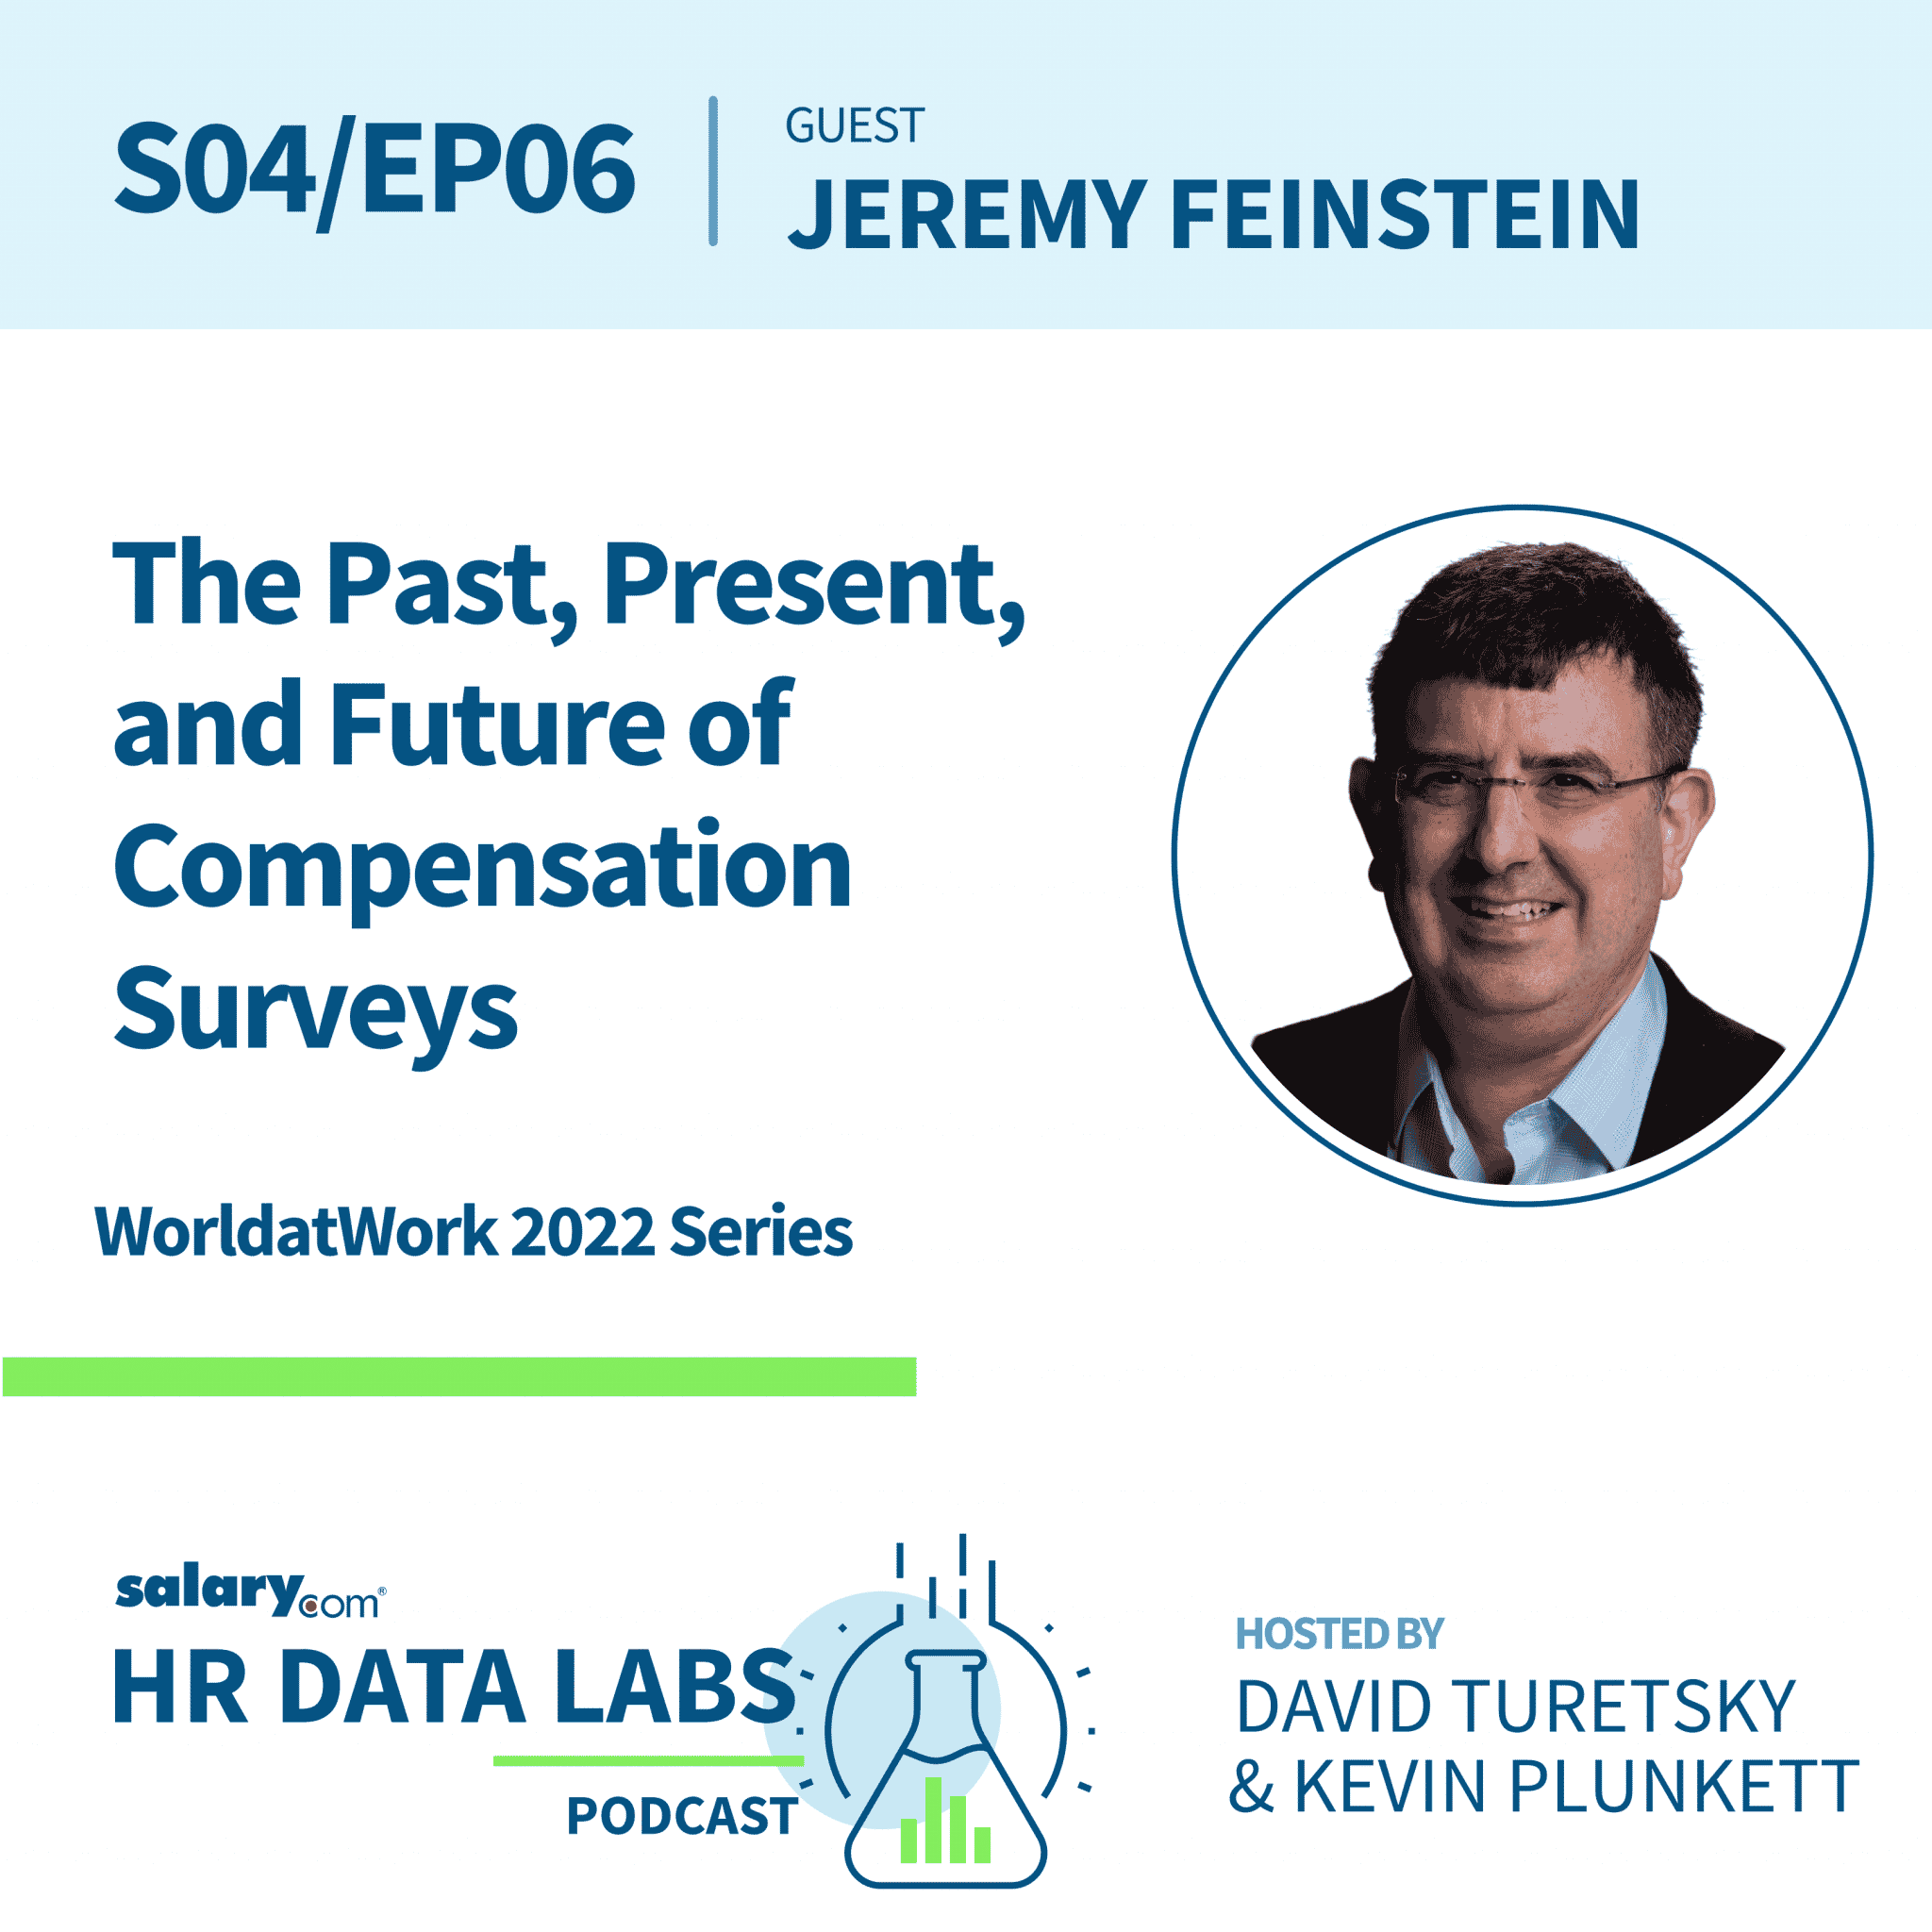 Jeremy Feinstein and Kevin Plunkett – WorldatWork 2022 Series: The Past, Present, and Future of Compensation Surveys